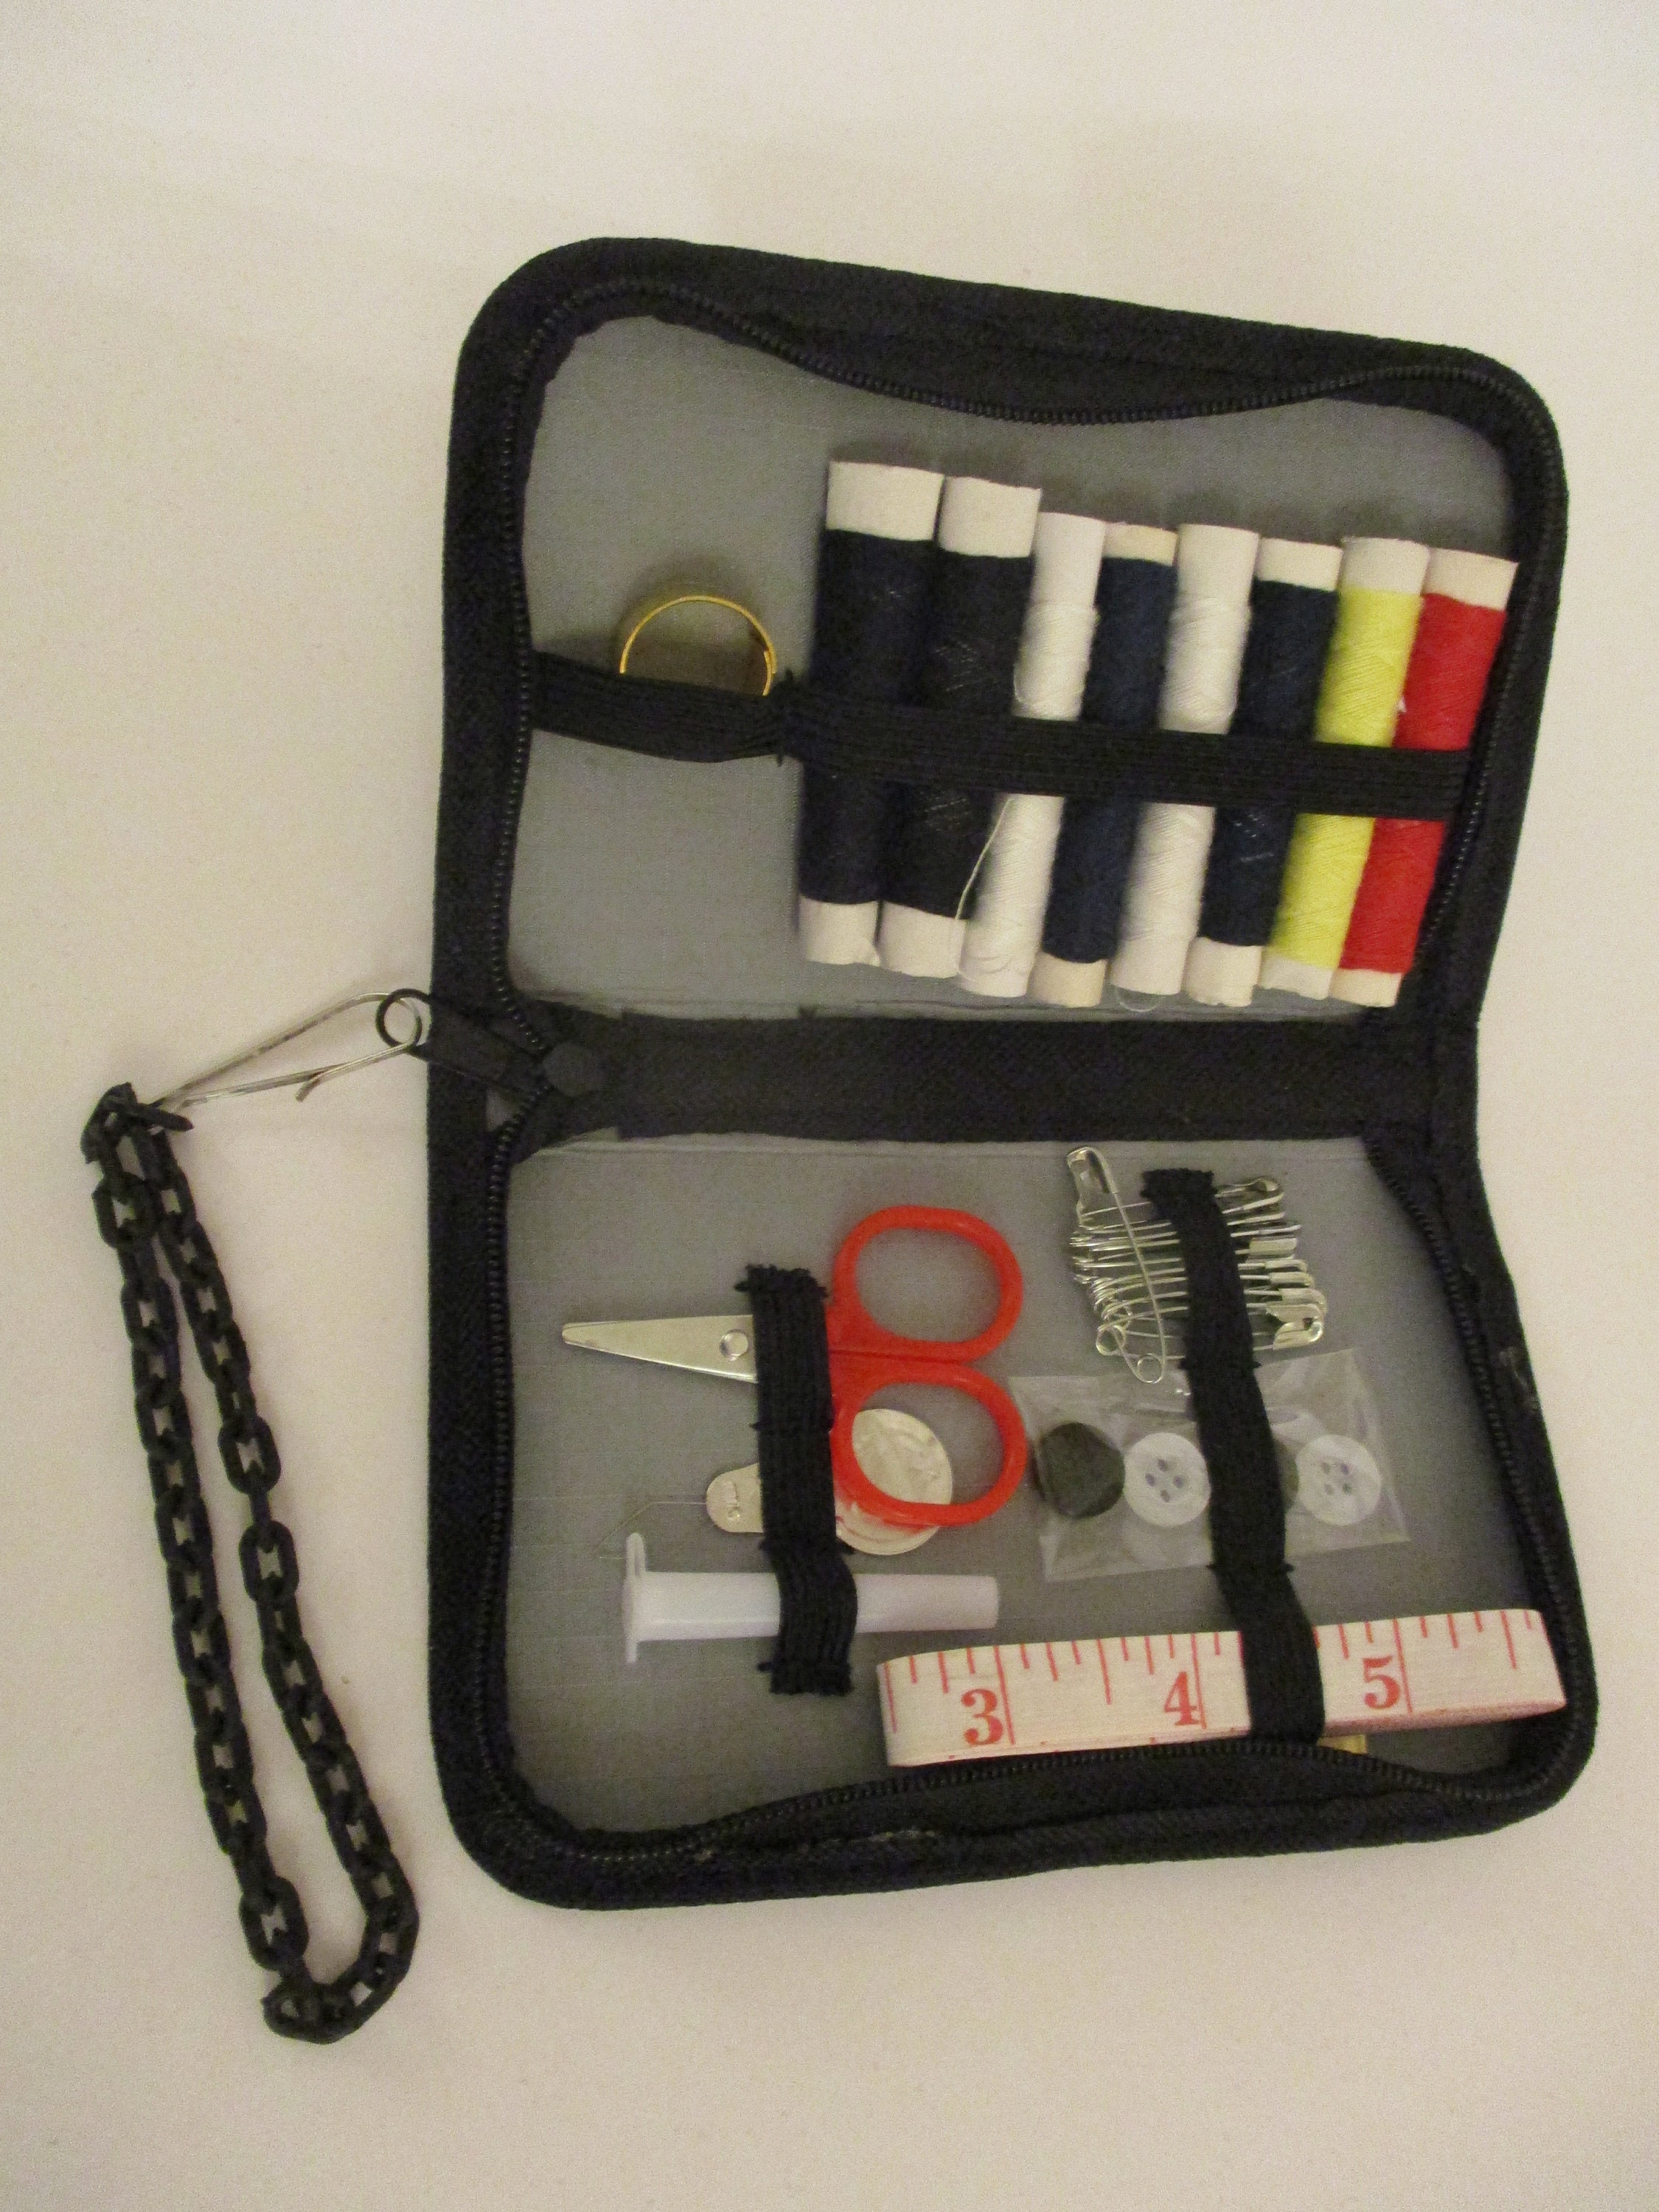 Portable Sewing Kit 32 Piece Travel Sewing Kit Fabric Sewing Kit Chain  Wristlet Strap Needle Threat Tape Measure Scissors Button Safety Pin 